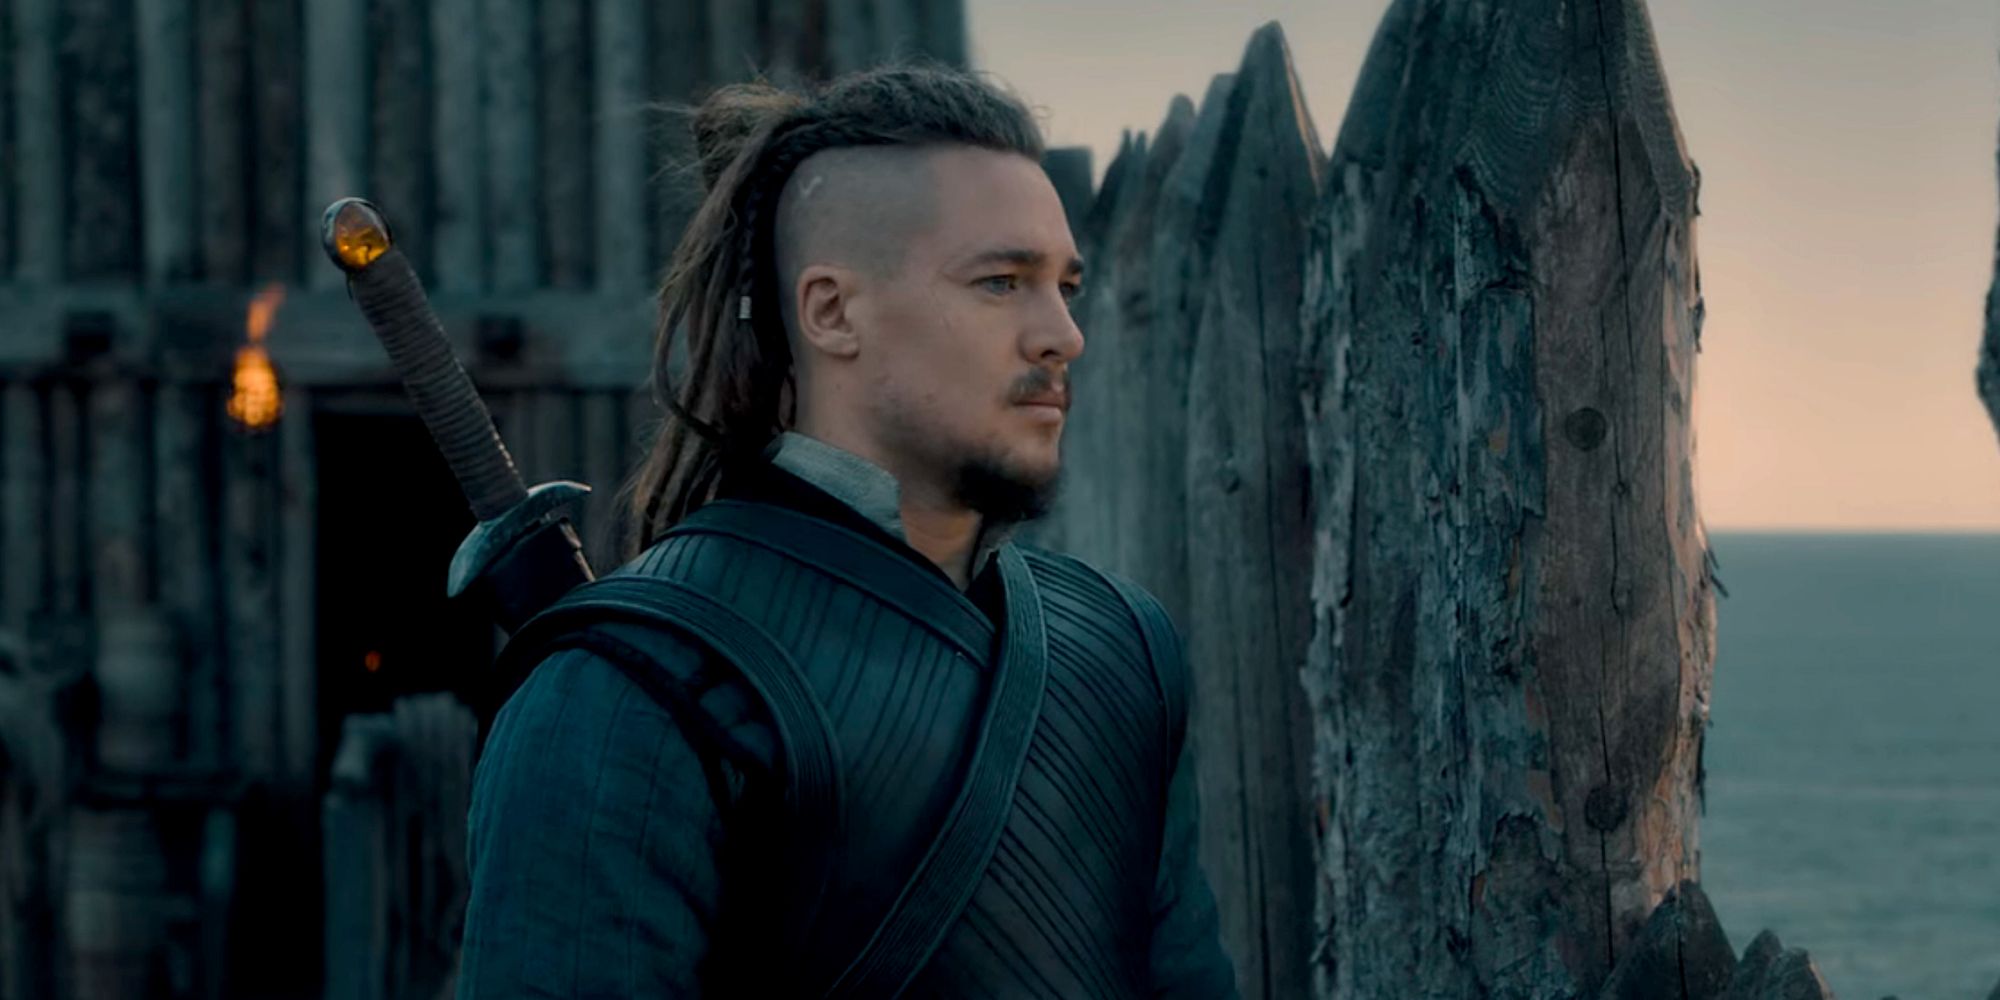 the last kingdom finale uhtred looking from bebbanburg